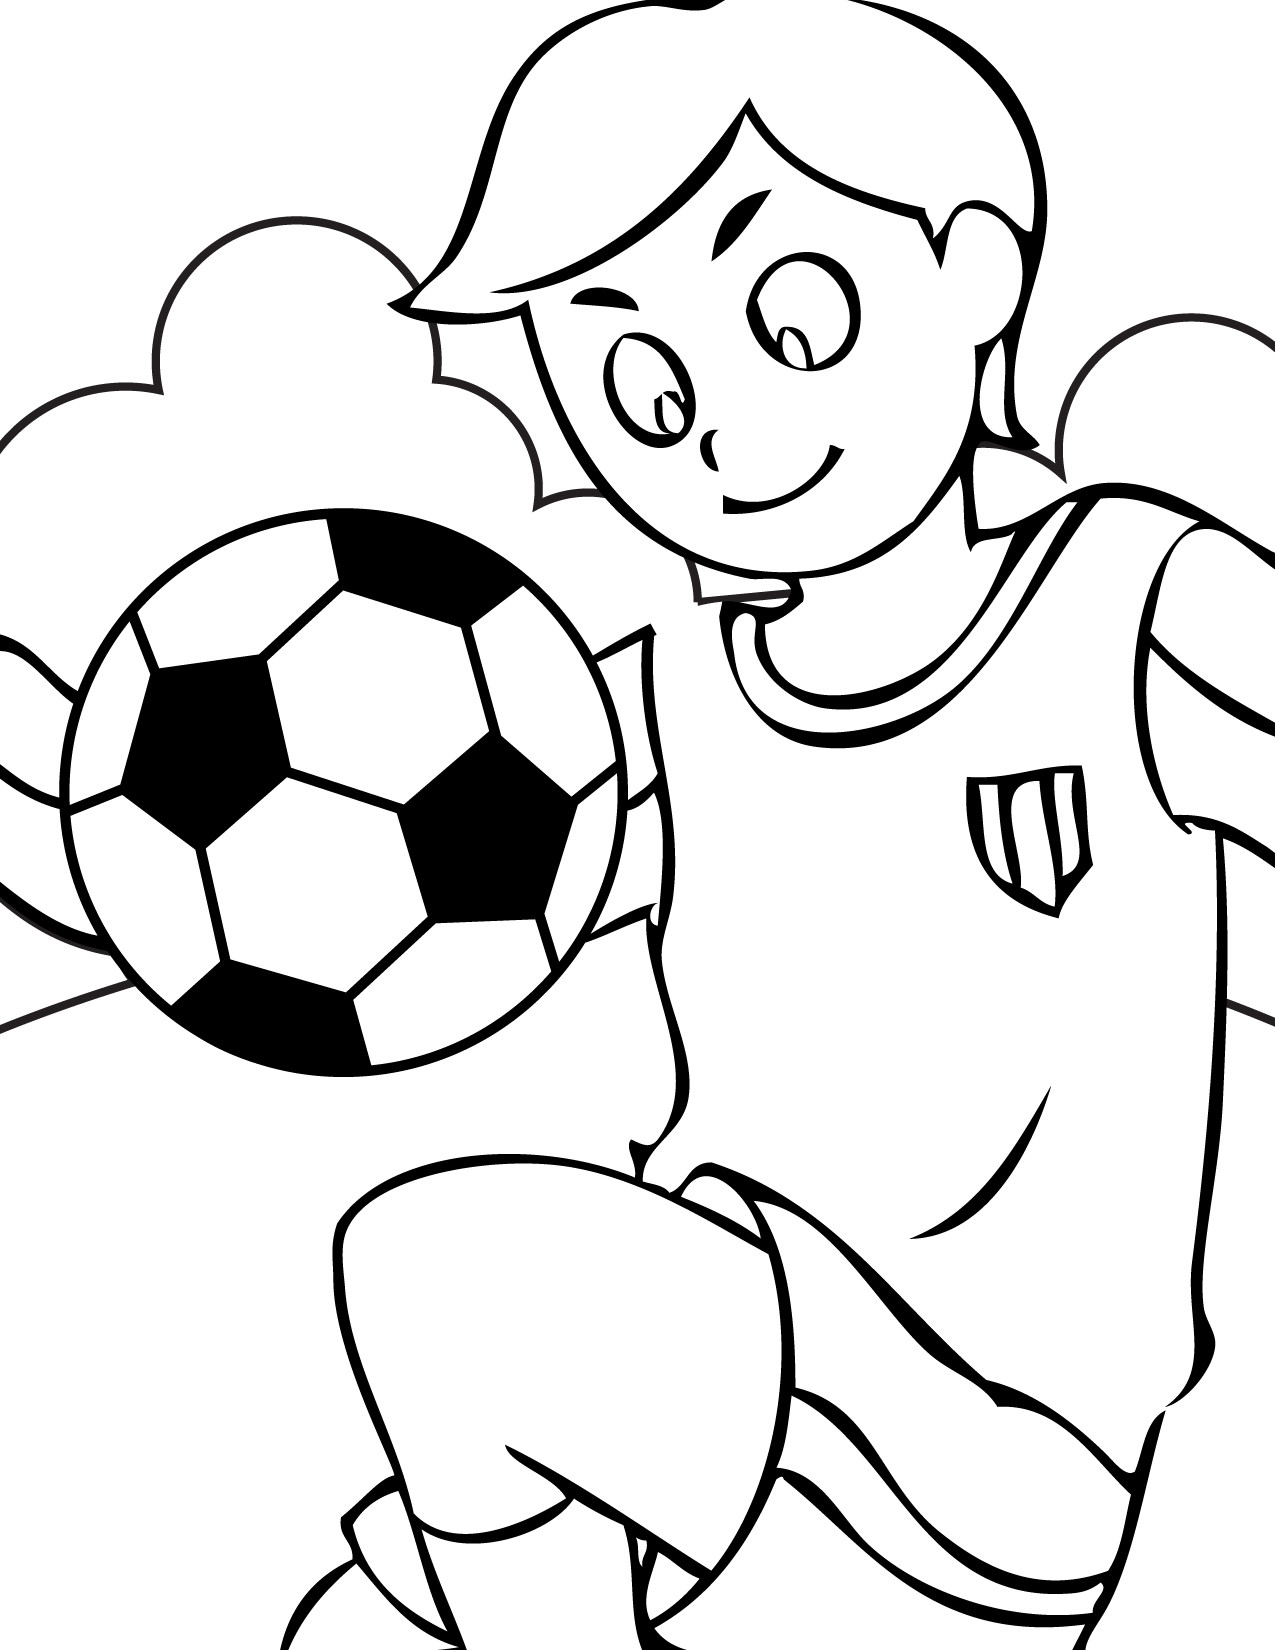 Free Coloring Pages For Boys Sports
 sports coloring pages for boys